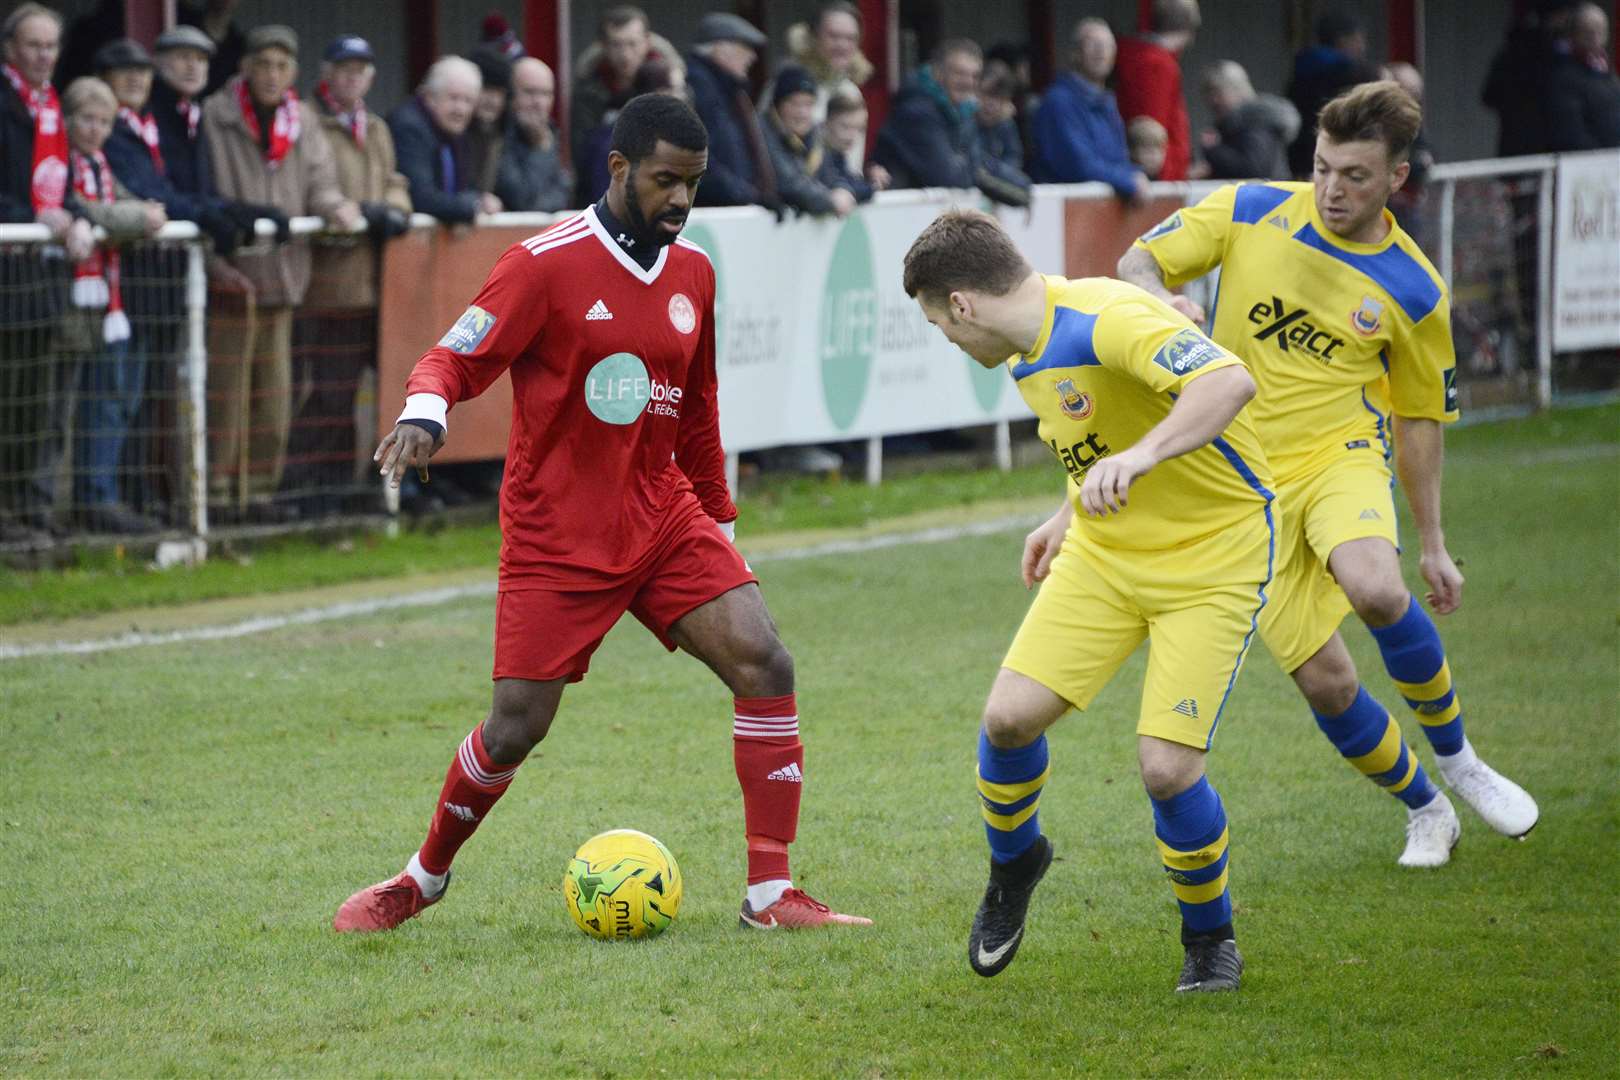 Ryan Palmer takes on the Whitstable defence Picture: Paul Amos